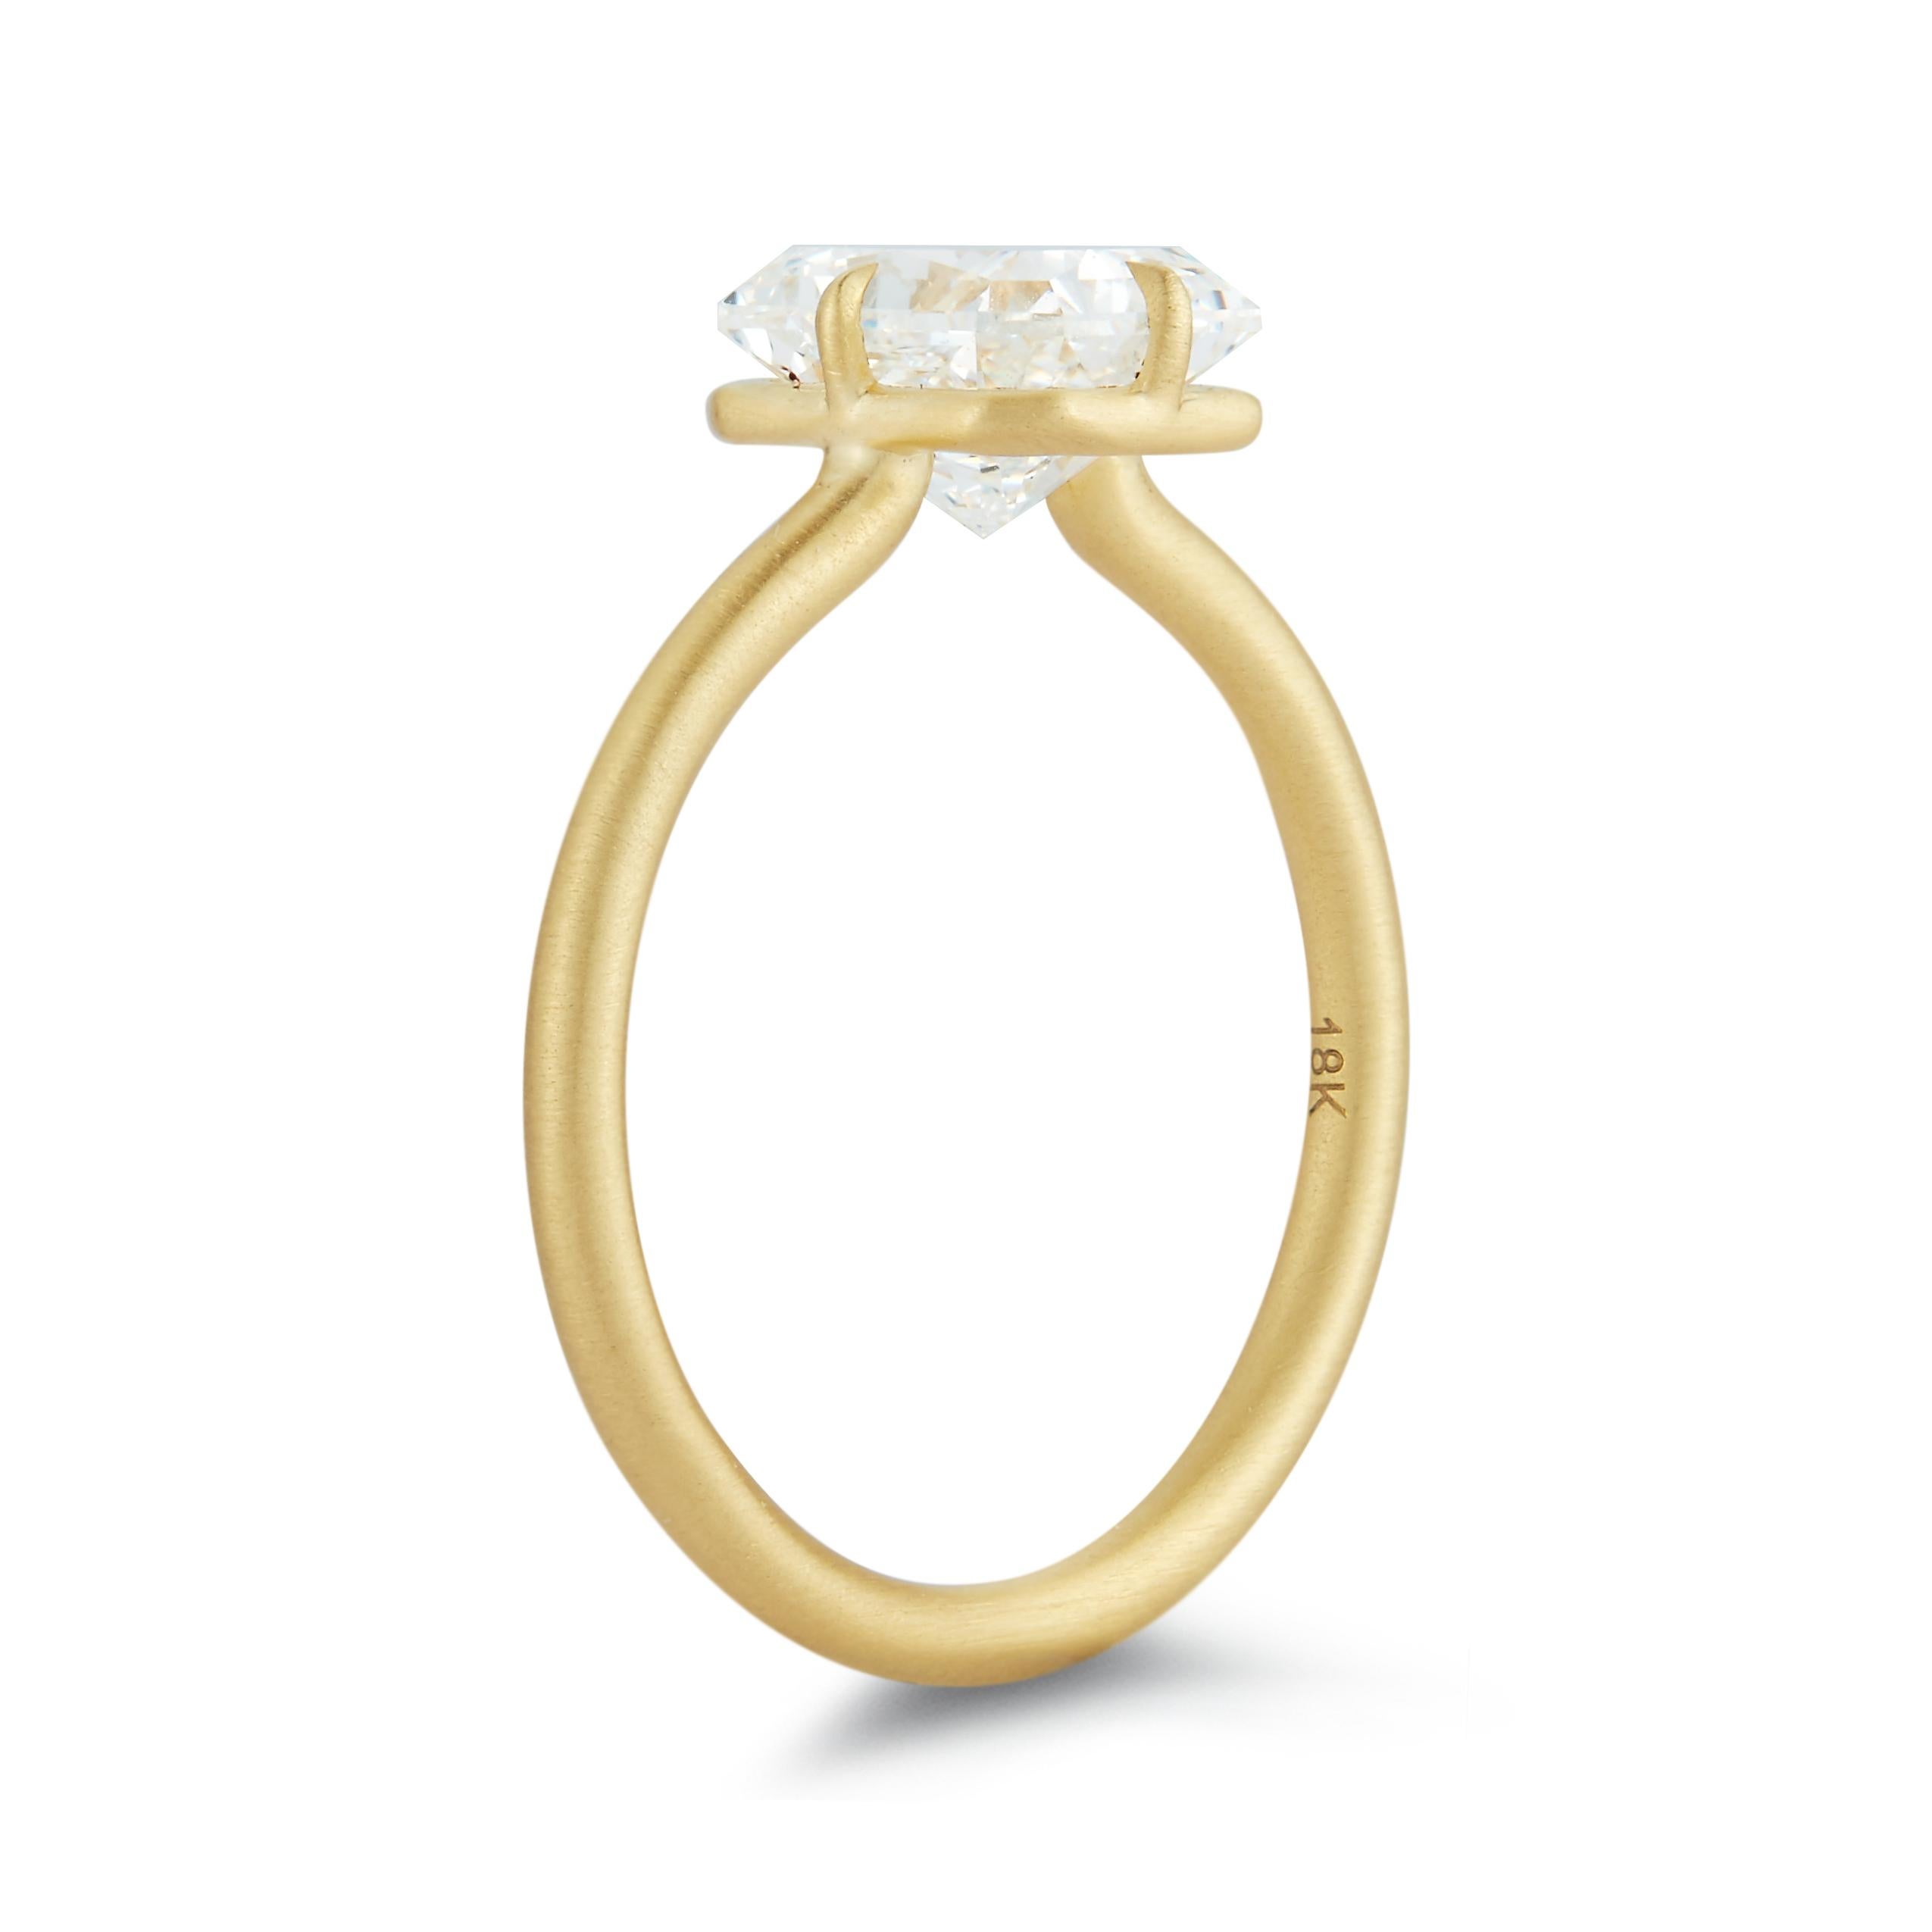 A radiant cut diamond shines without any distraction from the setting. The prongs are shaped to a sharp claw point while there is a beautiful simplicity in the band.